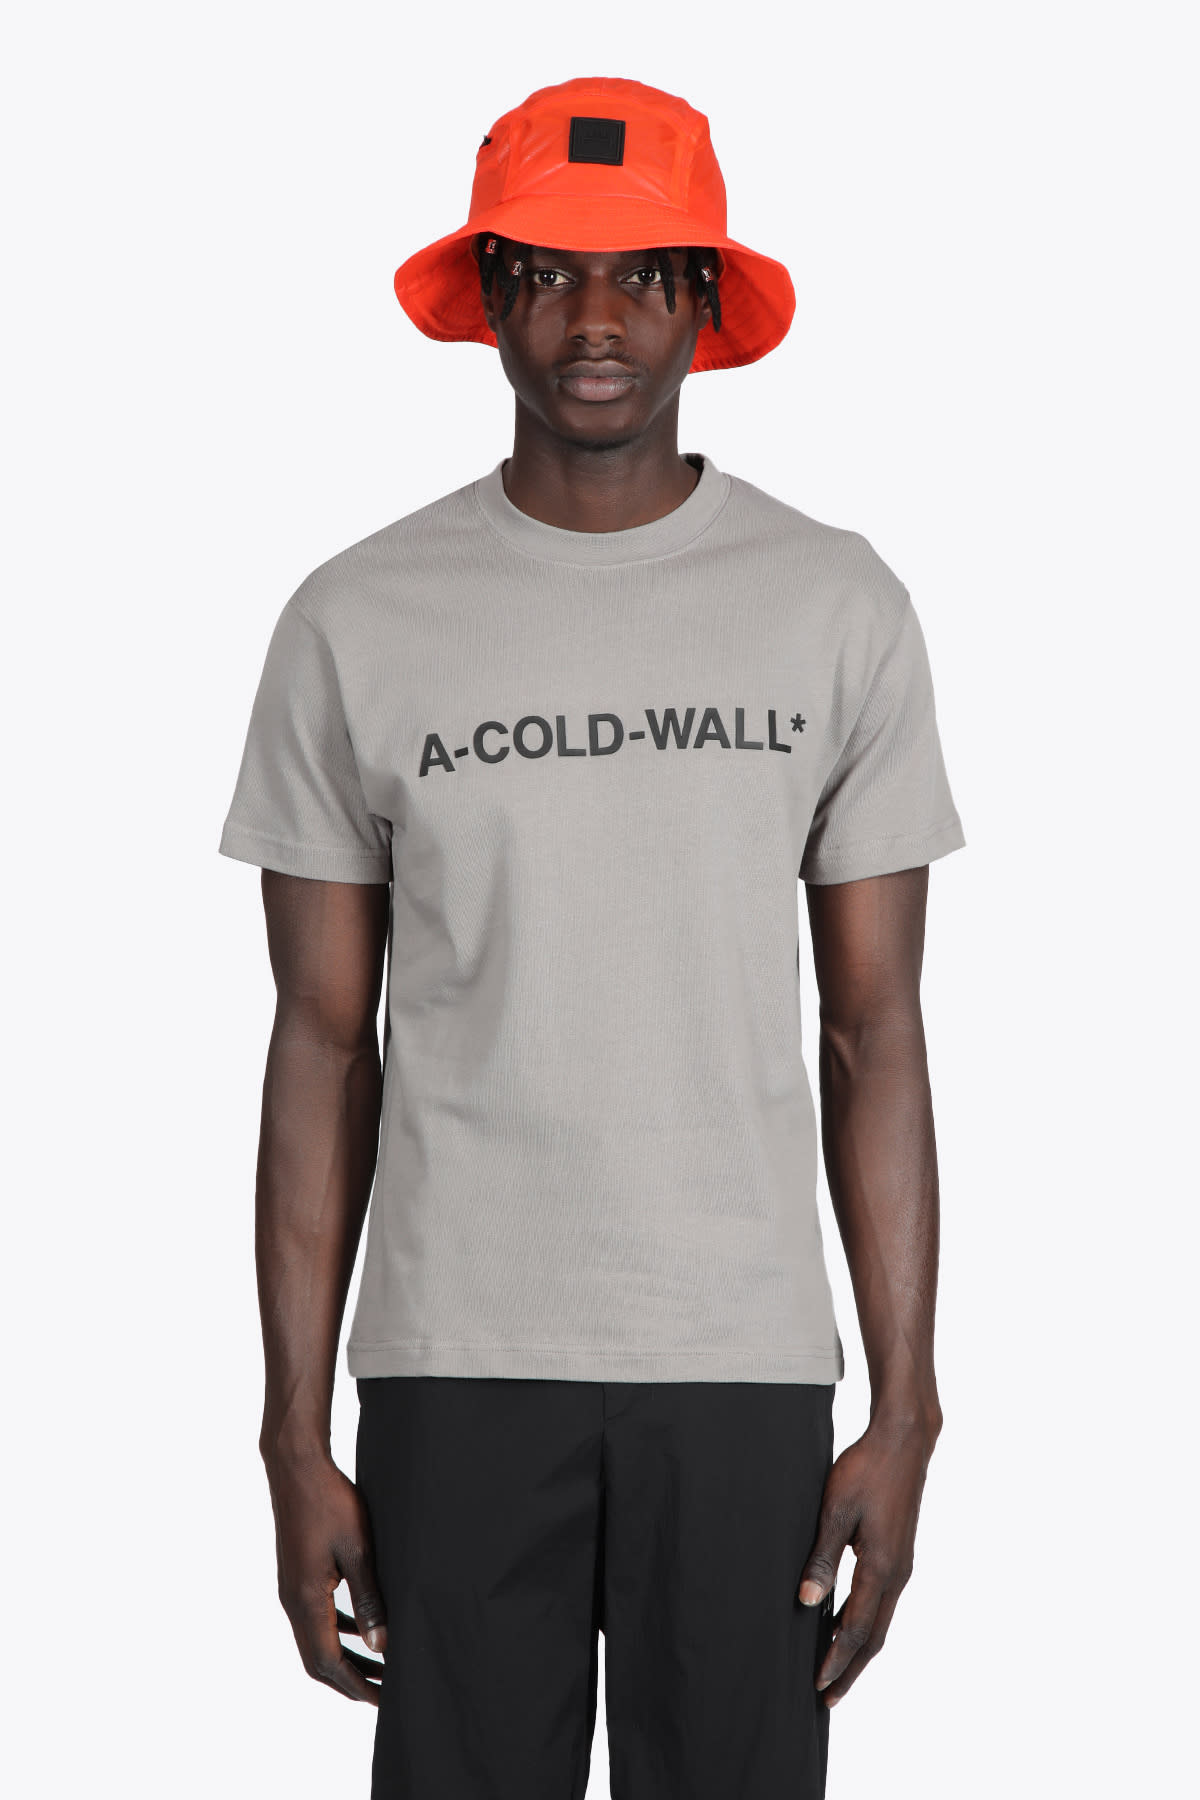 A-COLD-WALL Knitted Esssential Ss Logo T-shirt Grey cotton t-shirt with front logo